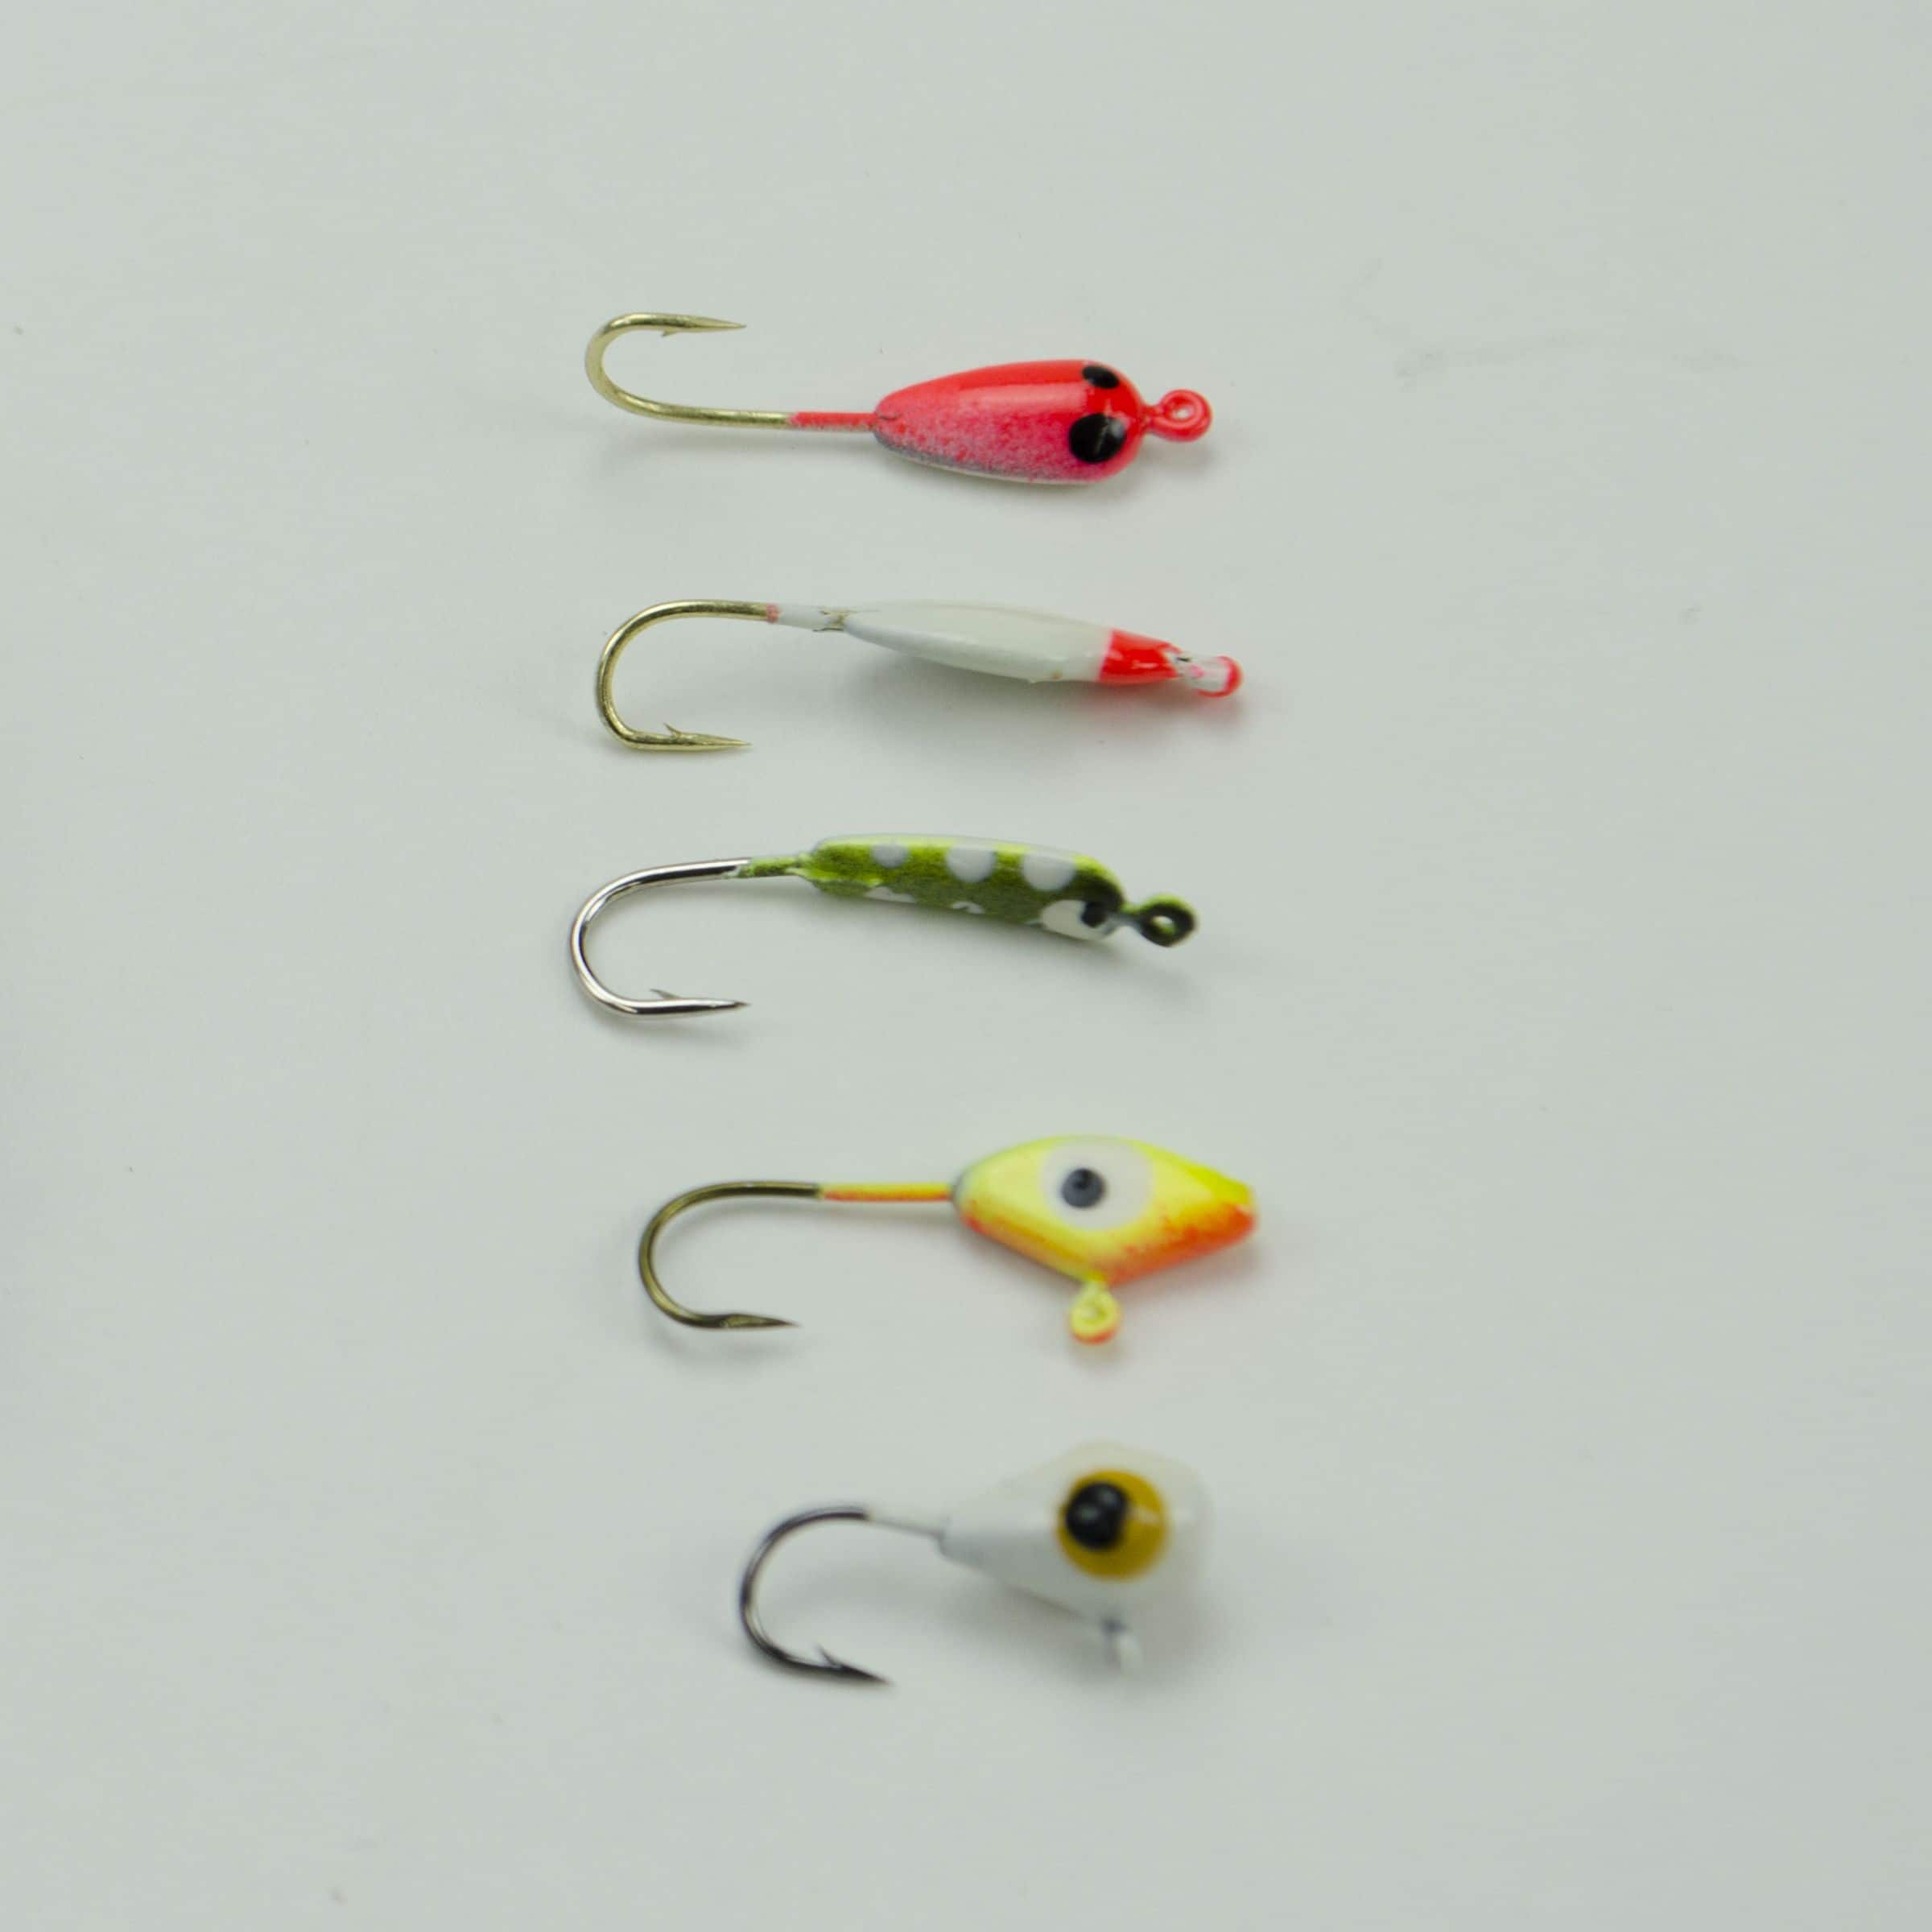 Fishing Lure Photograph 4 lures on string Color photo unique rip in matted  frame 